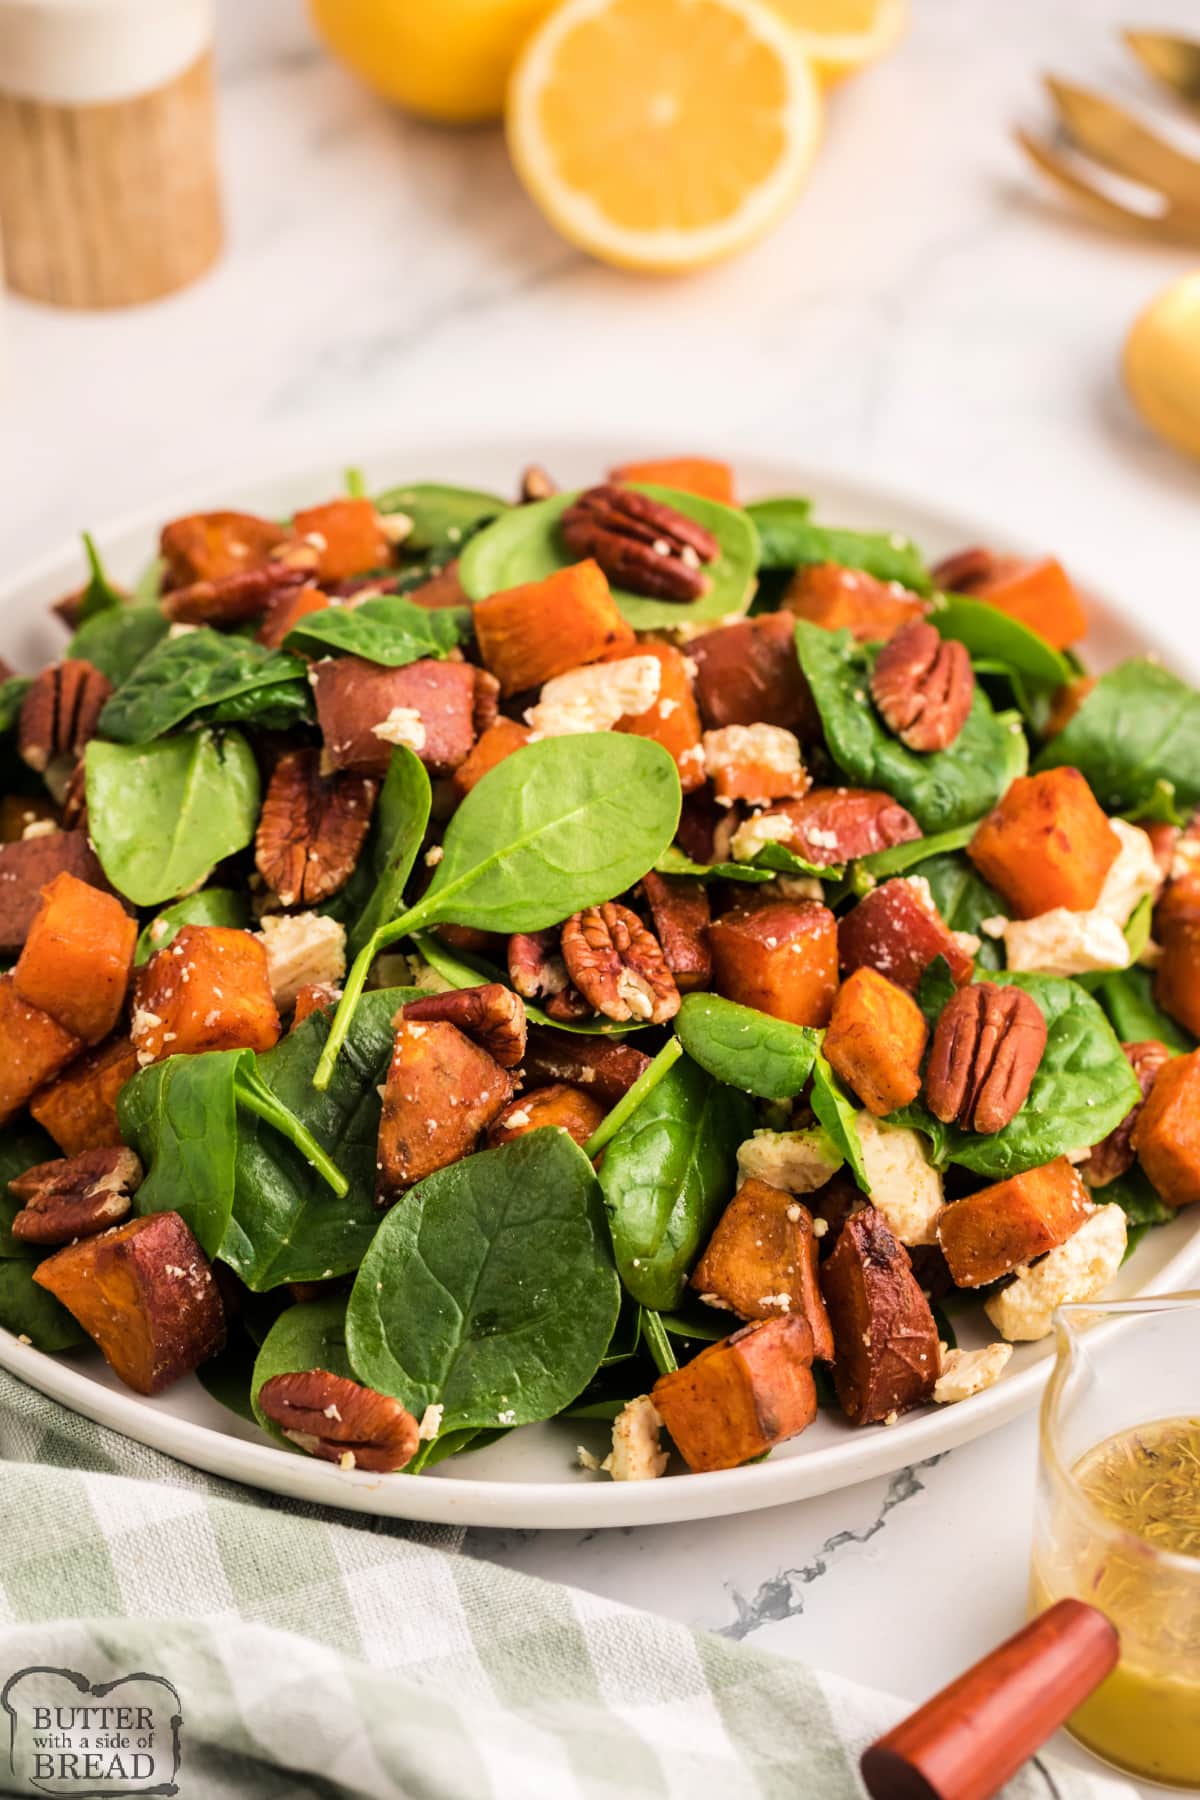 Roasted Sweet Potato Salad is made with sweet potatoes that have been coated in cinnamon and brown sugar and then roasted to perfection. This delicious salad recipe is simple enough to enjoy regularly, and fancy enough to serve at an elegant dinner! 